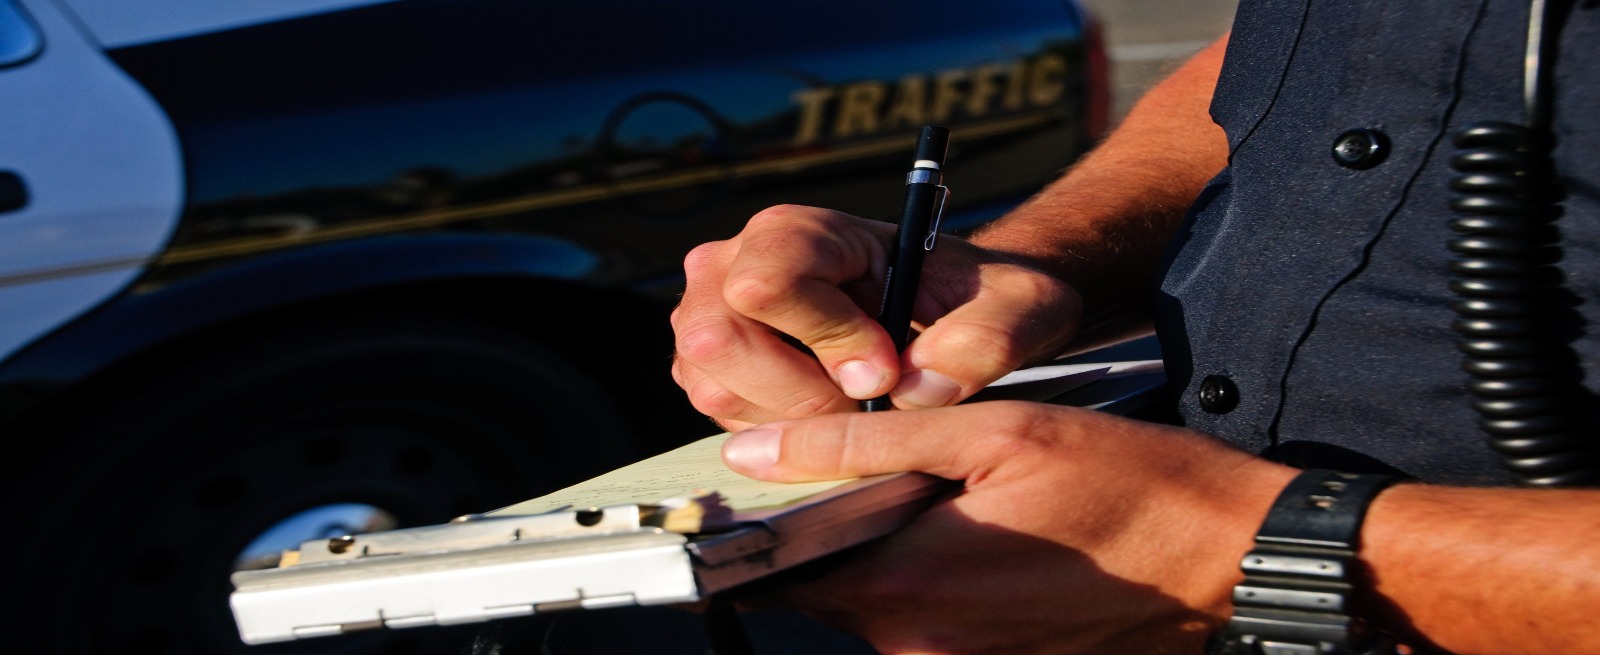 By-law enforcement writing a ticket